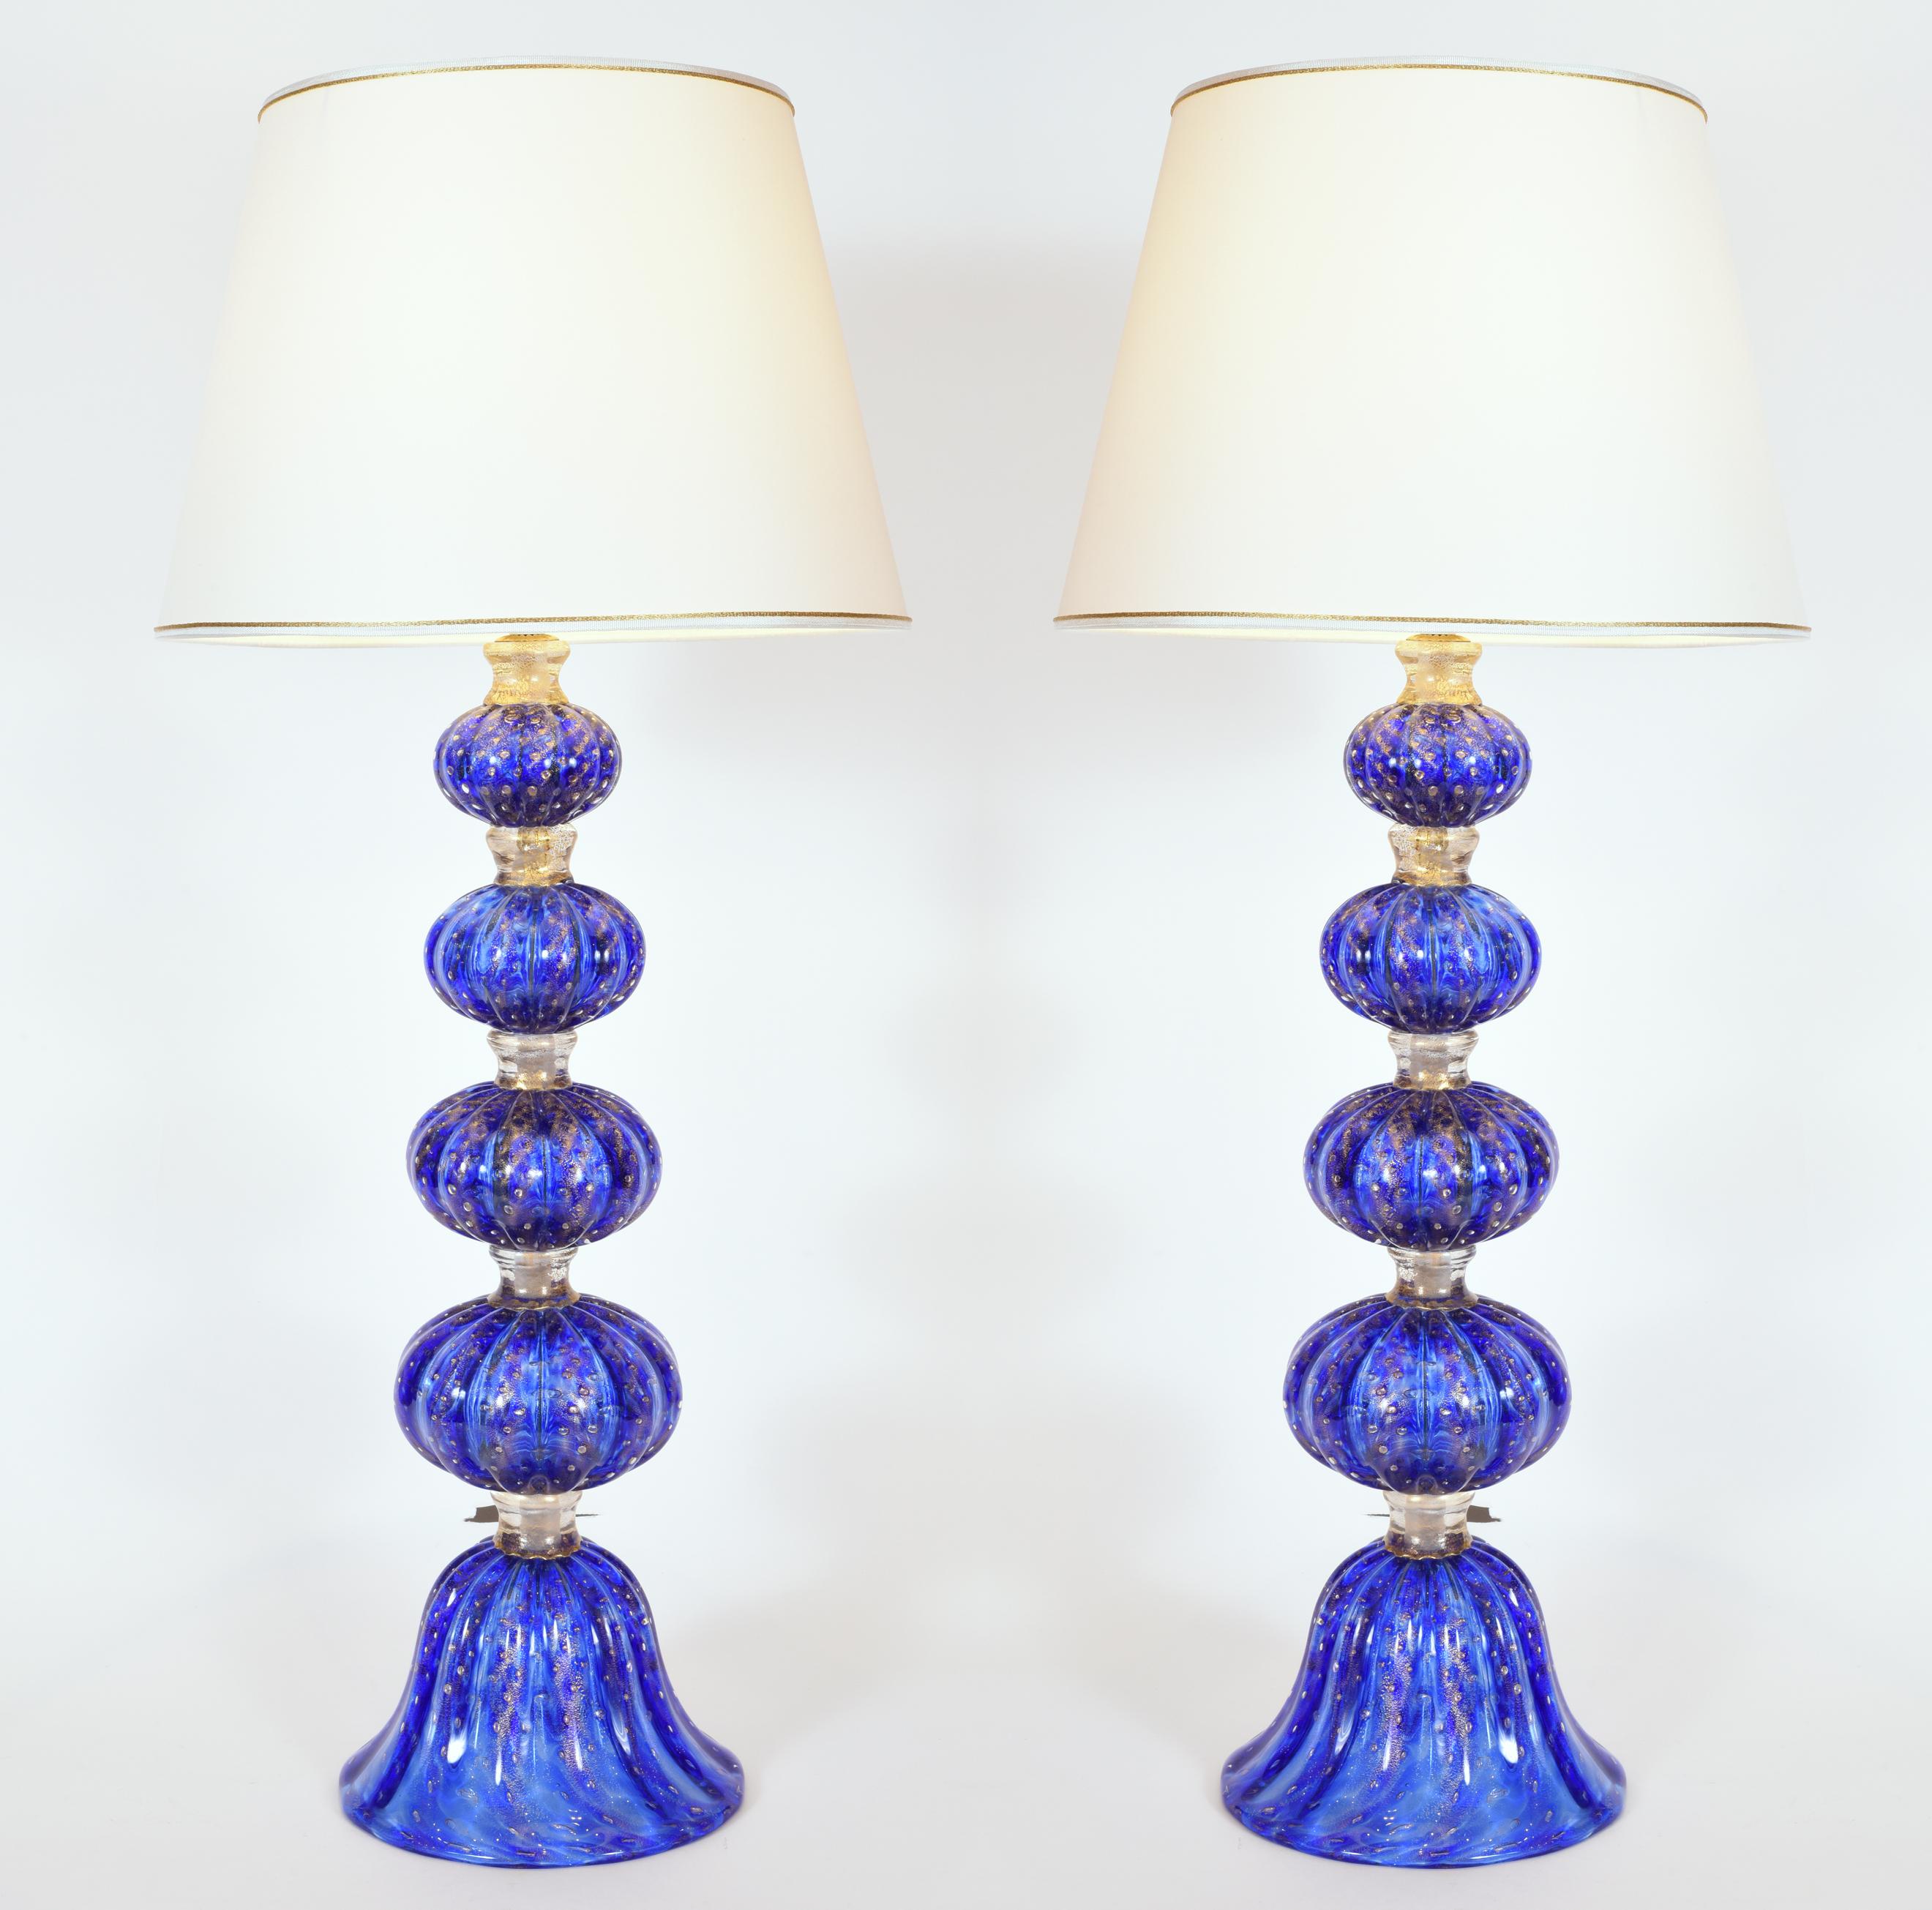 European Exquisite Pair of Cobalt Blue with Gold Flecks Table Lamps